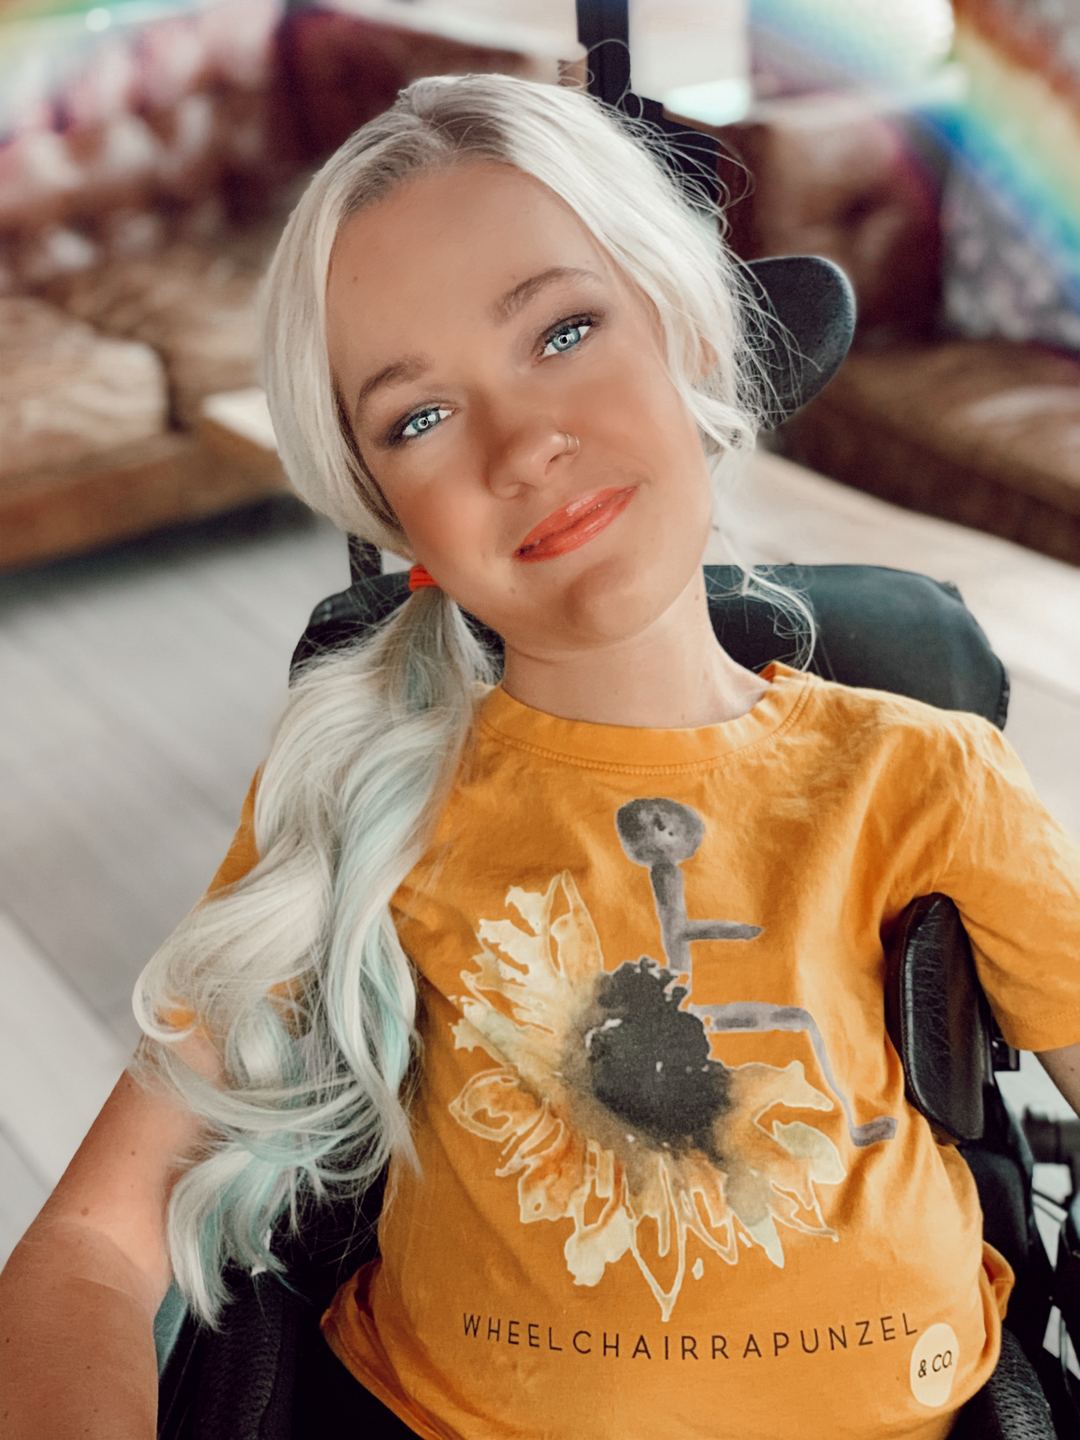 Wheelchair Rapunzel: 'Growing up, I never knew I was allowed